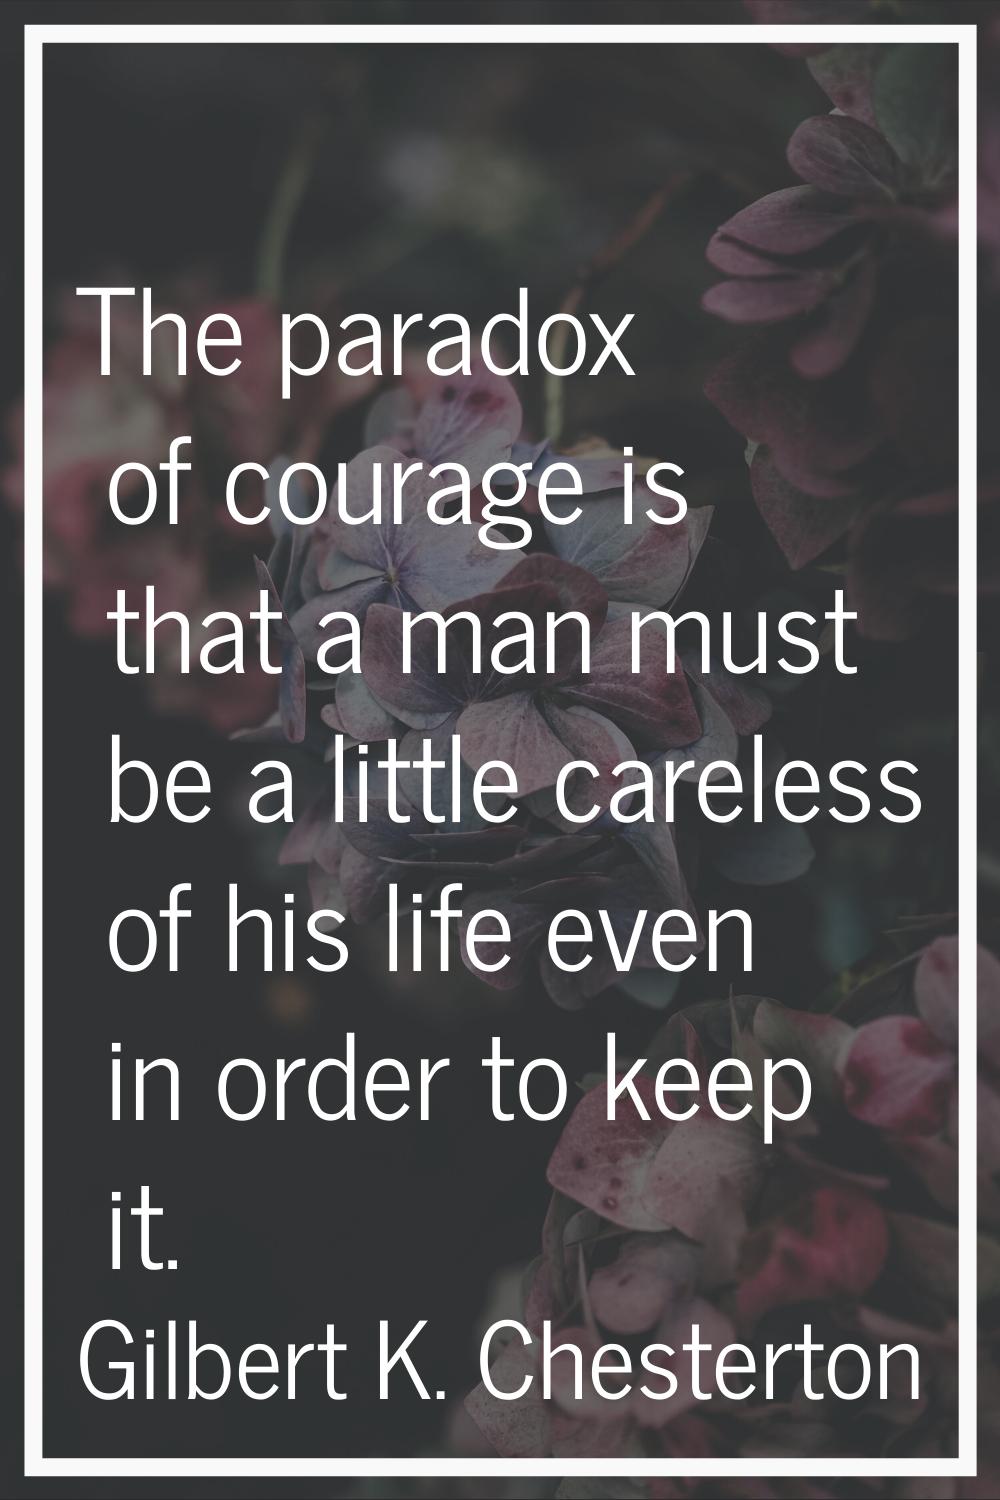 The paradox of courage is that a man must be a little careless of his life even in order to keep it